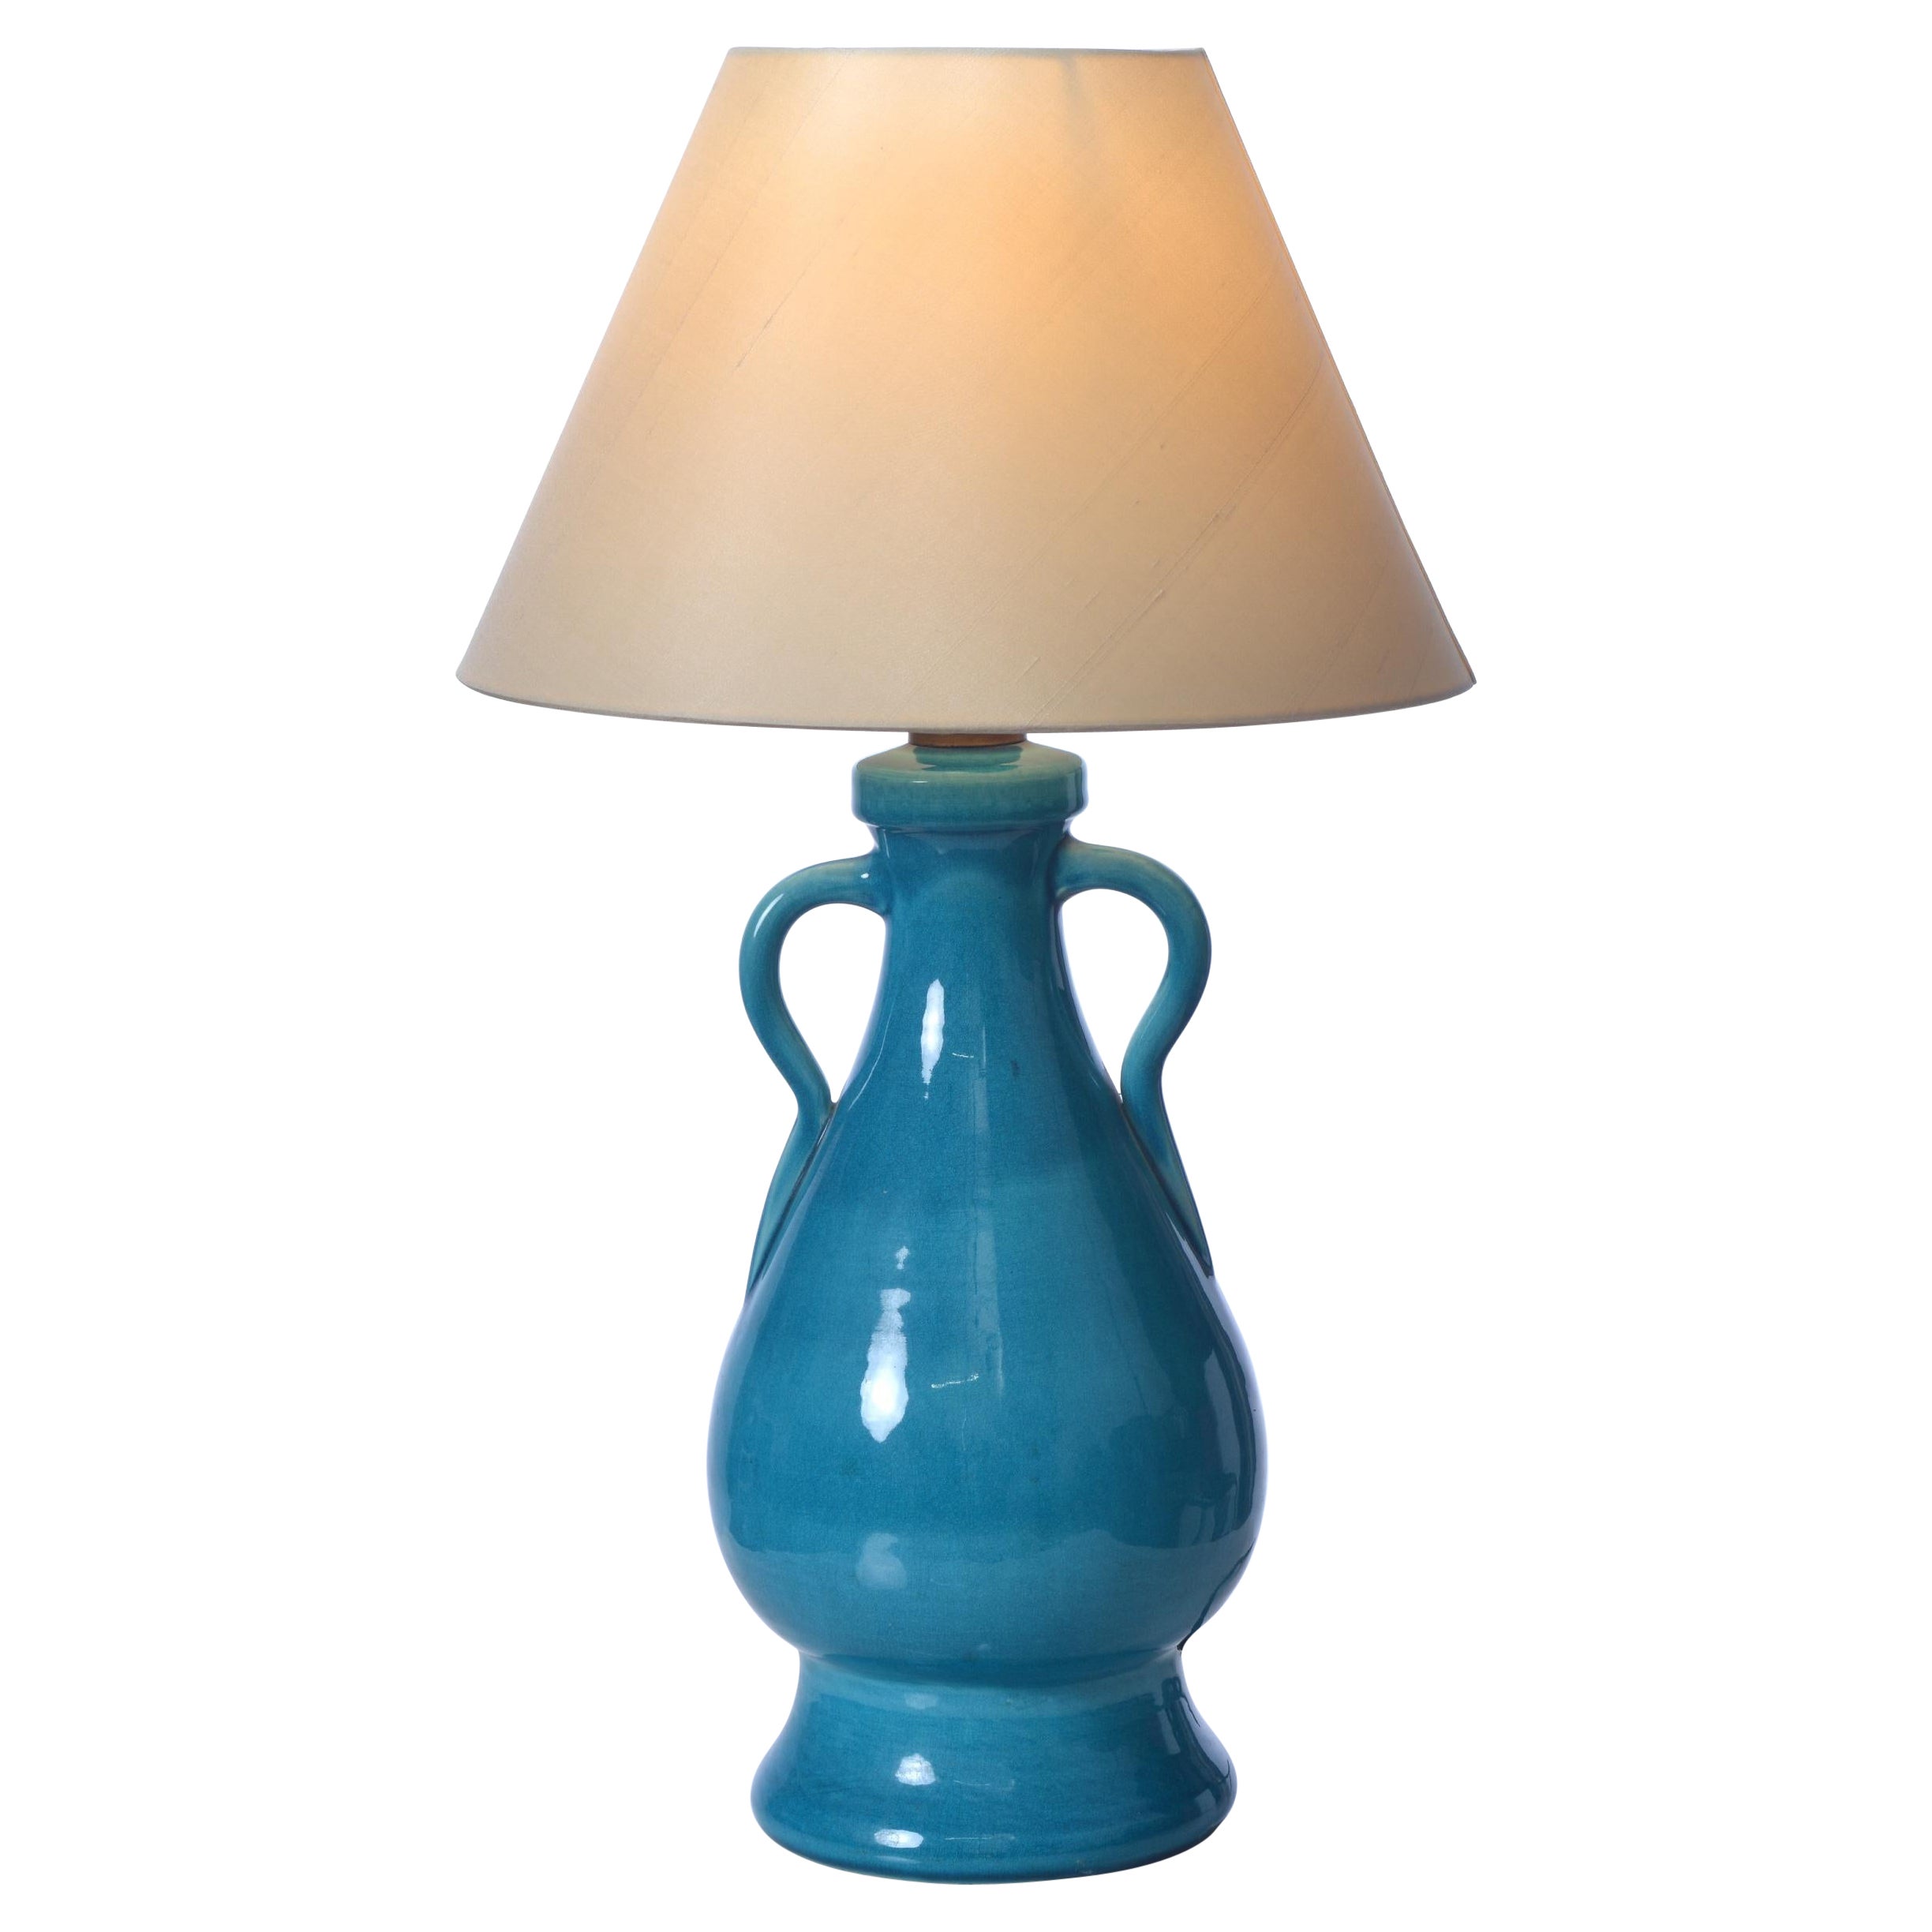 Turquoise ceramic table lamp by Accolay, France c.1955